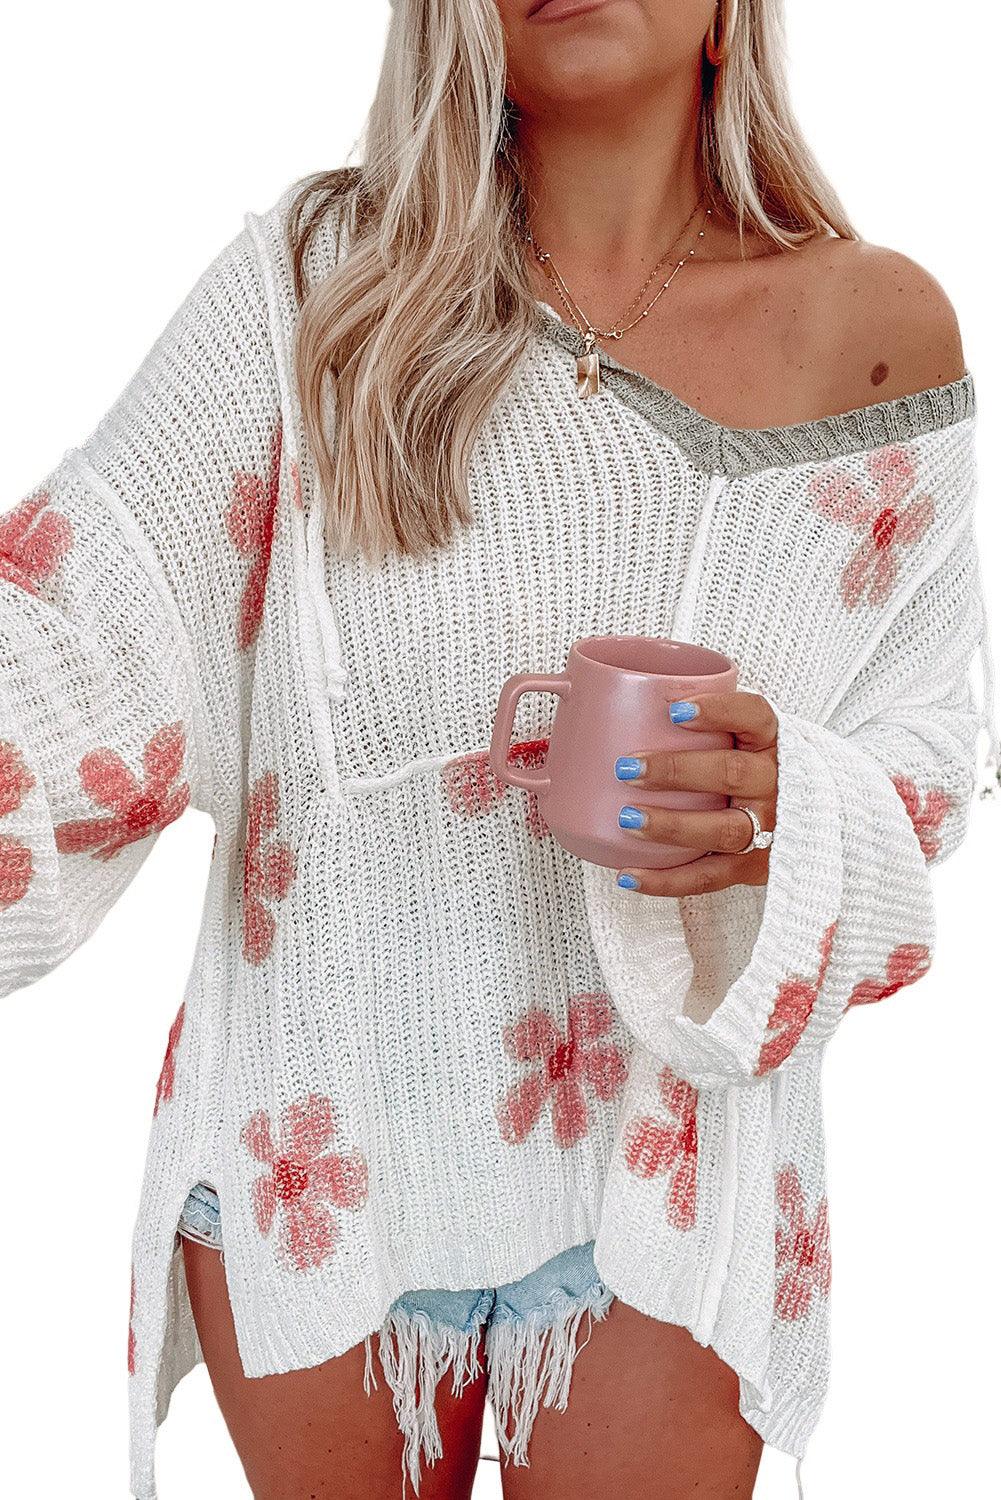 White Floral Print Lightweight Knit Hooded Sweater - L & M Kee, LLC